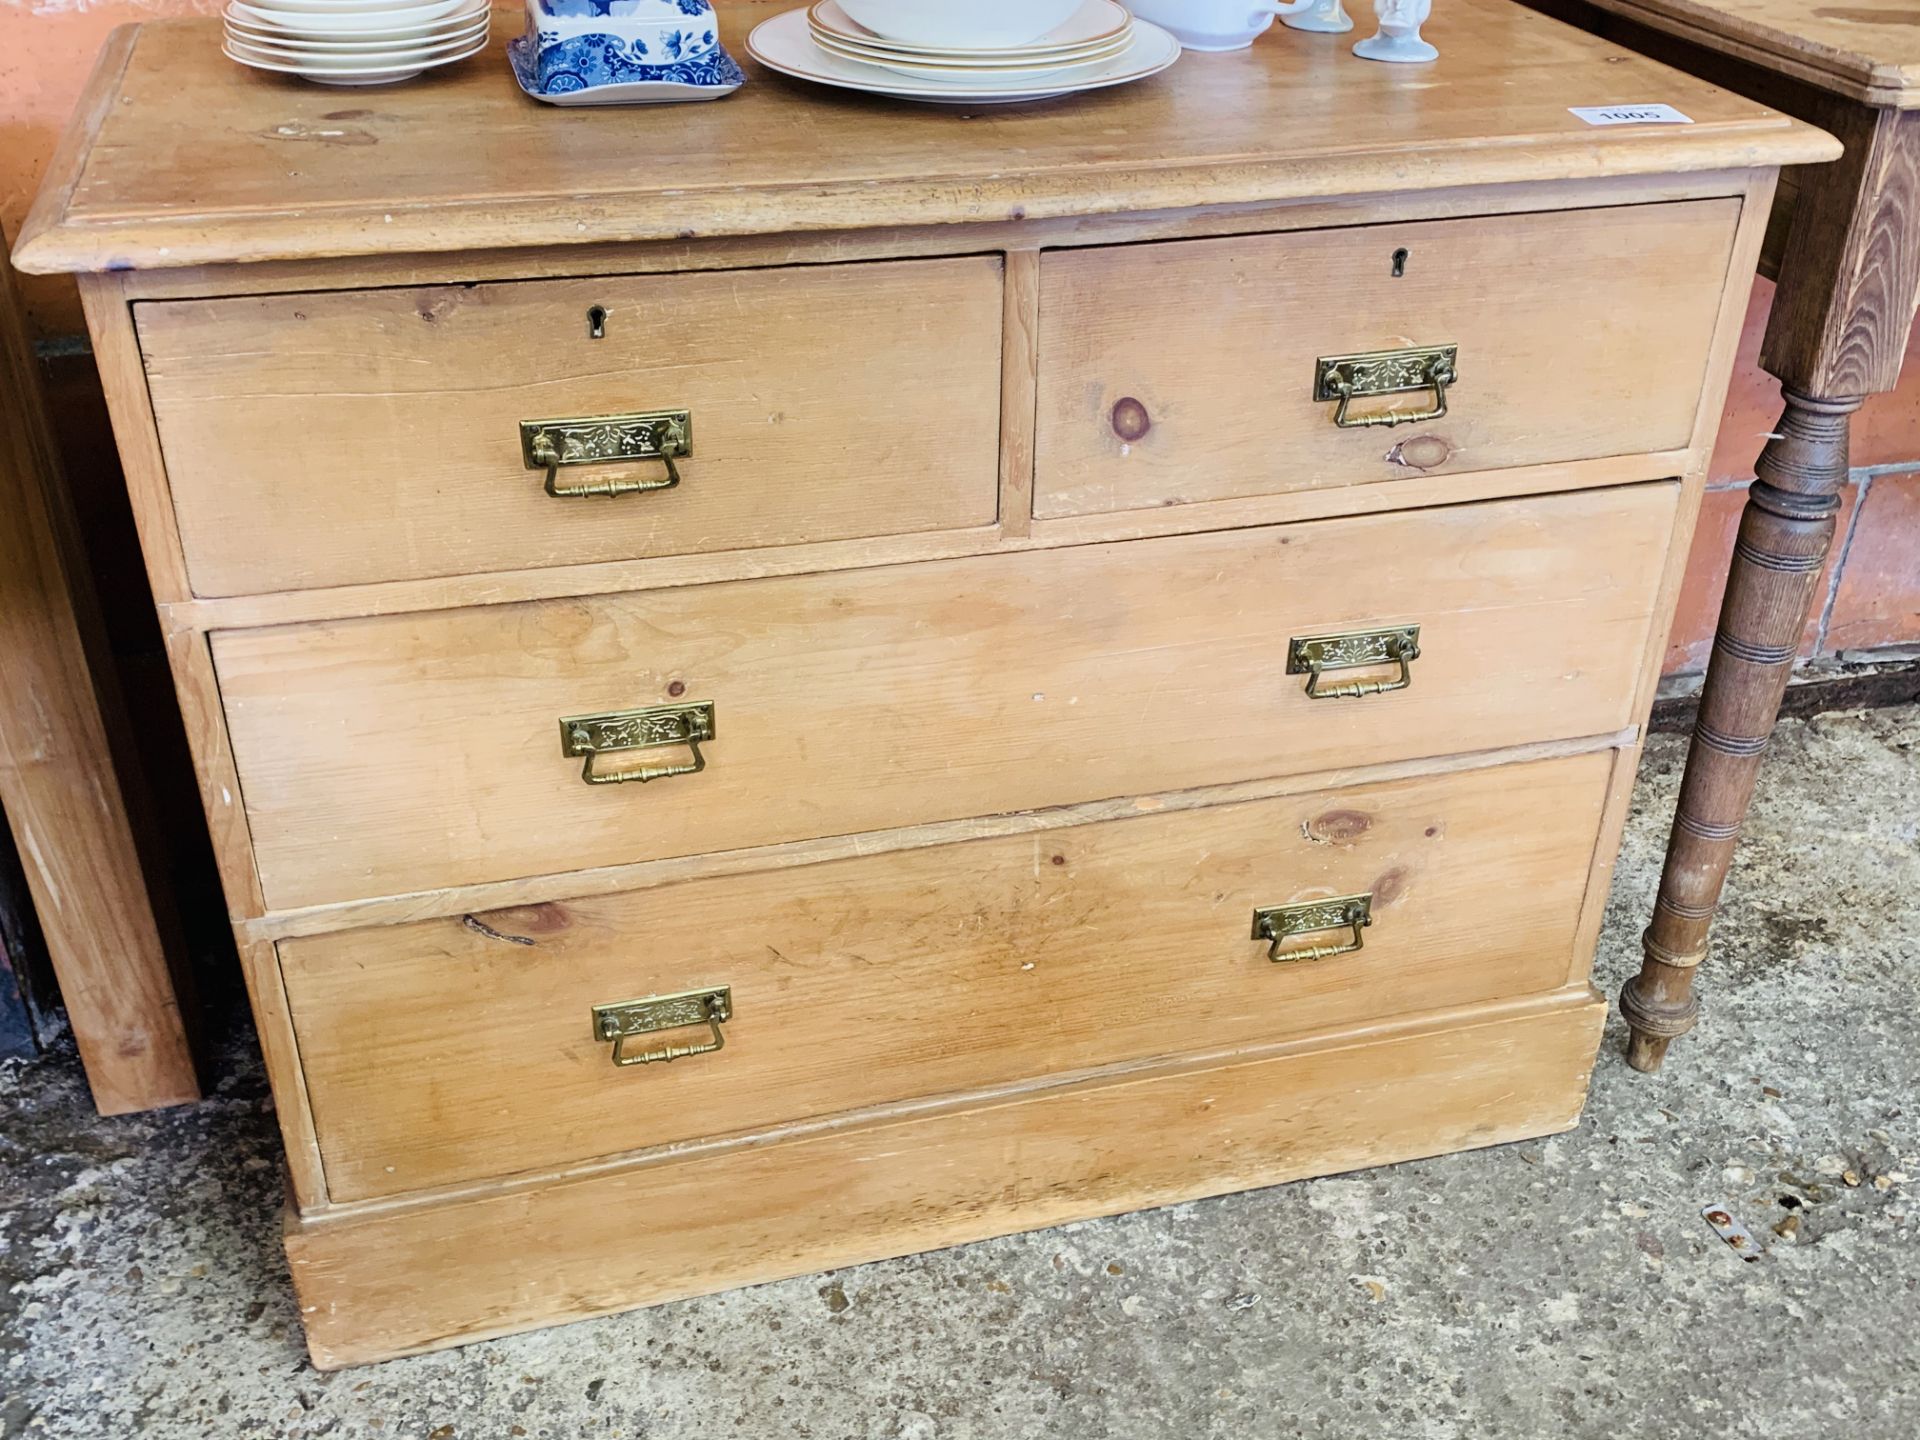 Antique pine chest two over two drawers with brass handles.